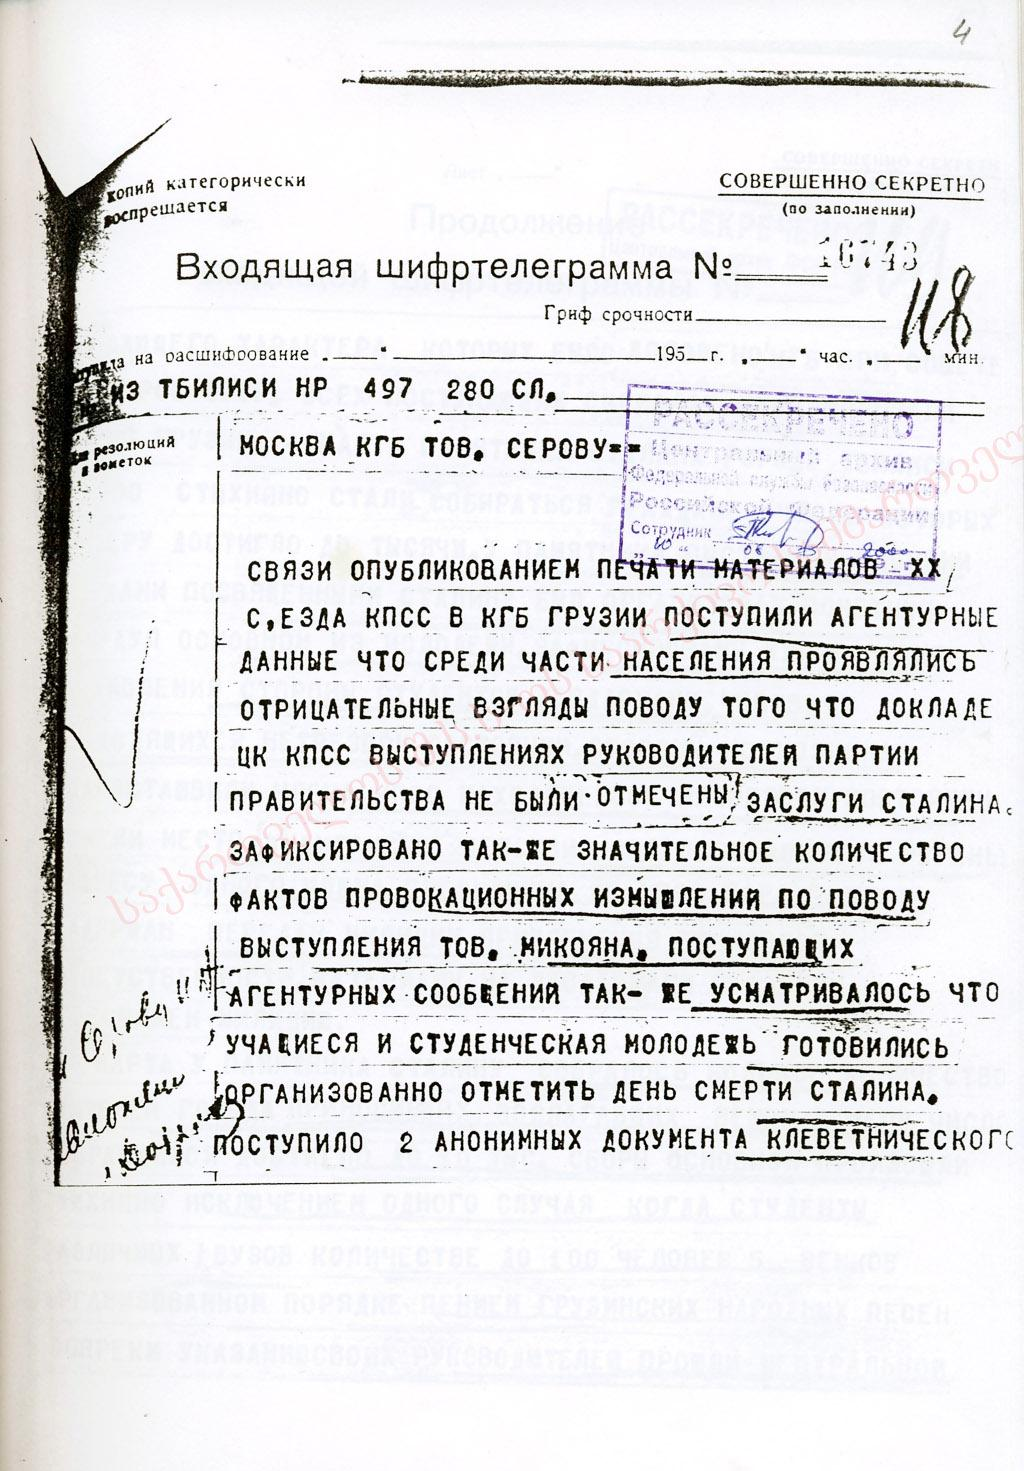 Cipher telegram from the Major General Shvirkov, the Deputy Chairman of the Committee for the State Security (KGB) at the Council of Ministers of the Georgian SSR, to the Chairman of the Committee for the State Security (KGB)of the USSR, Army General I. Serov. № 16743